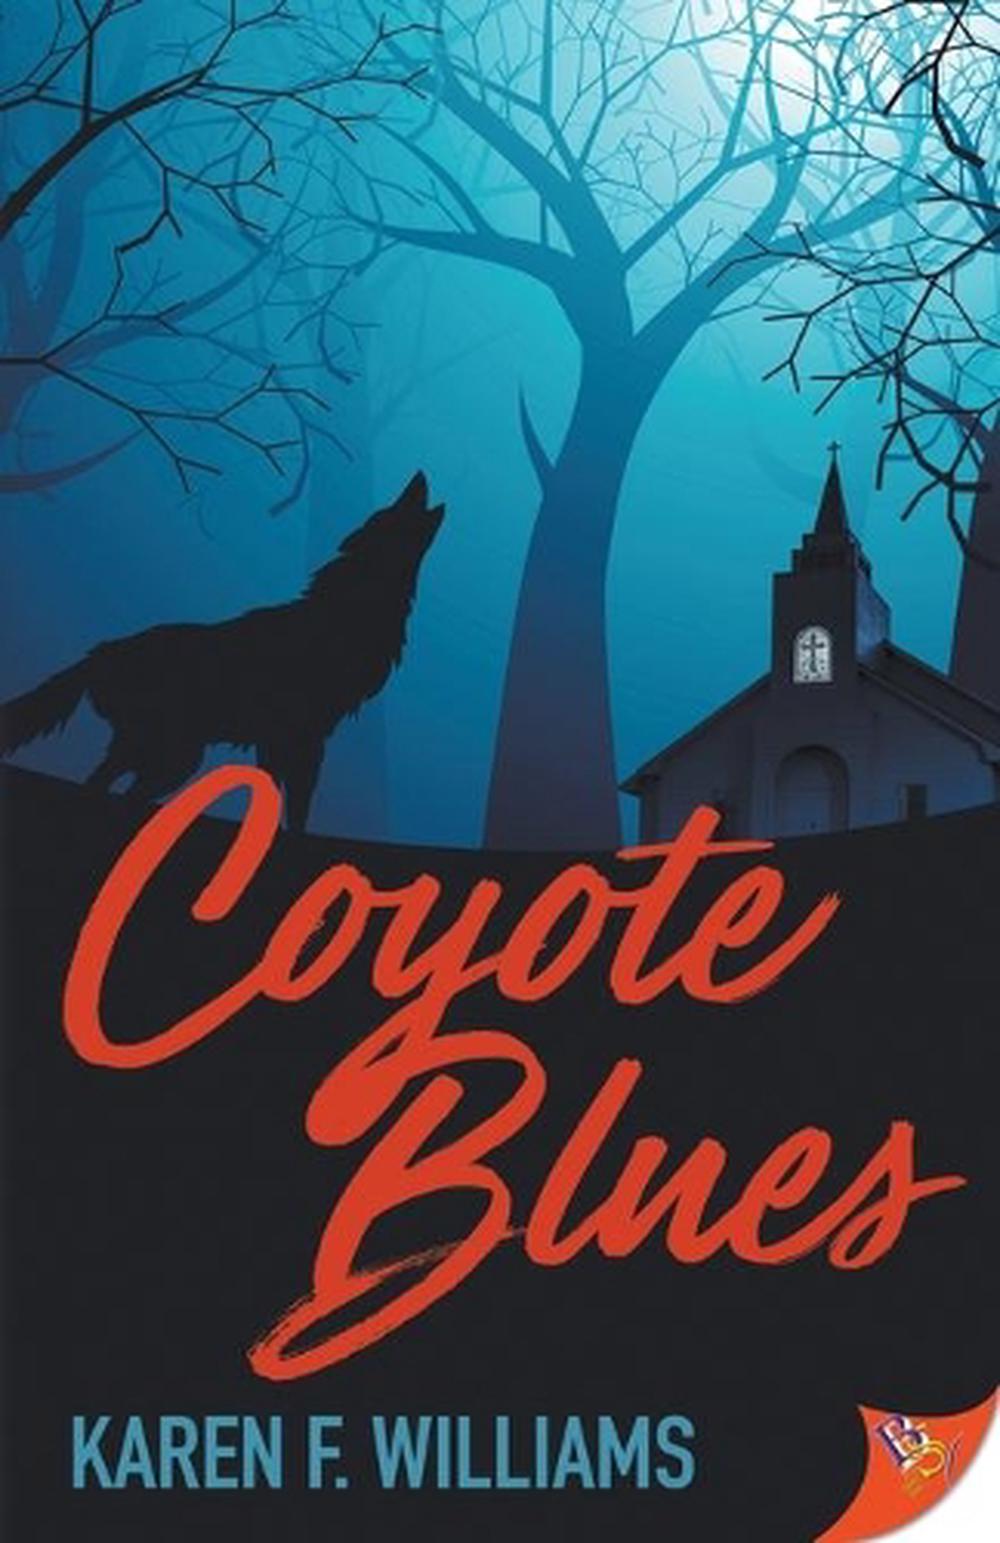 Coyote Blues by Karen F. Williams